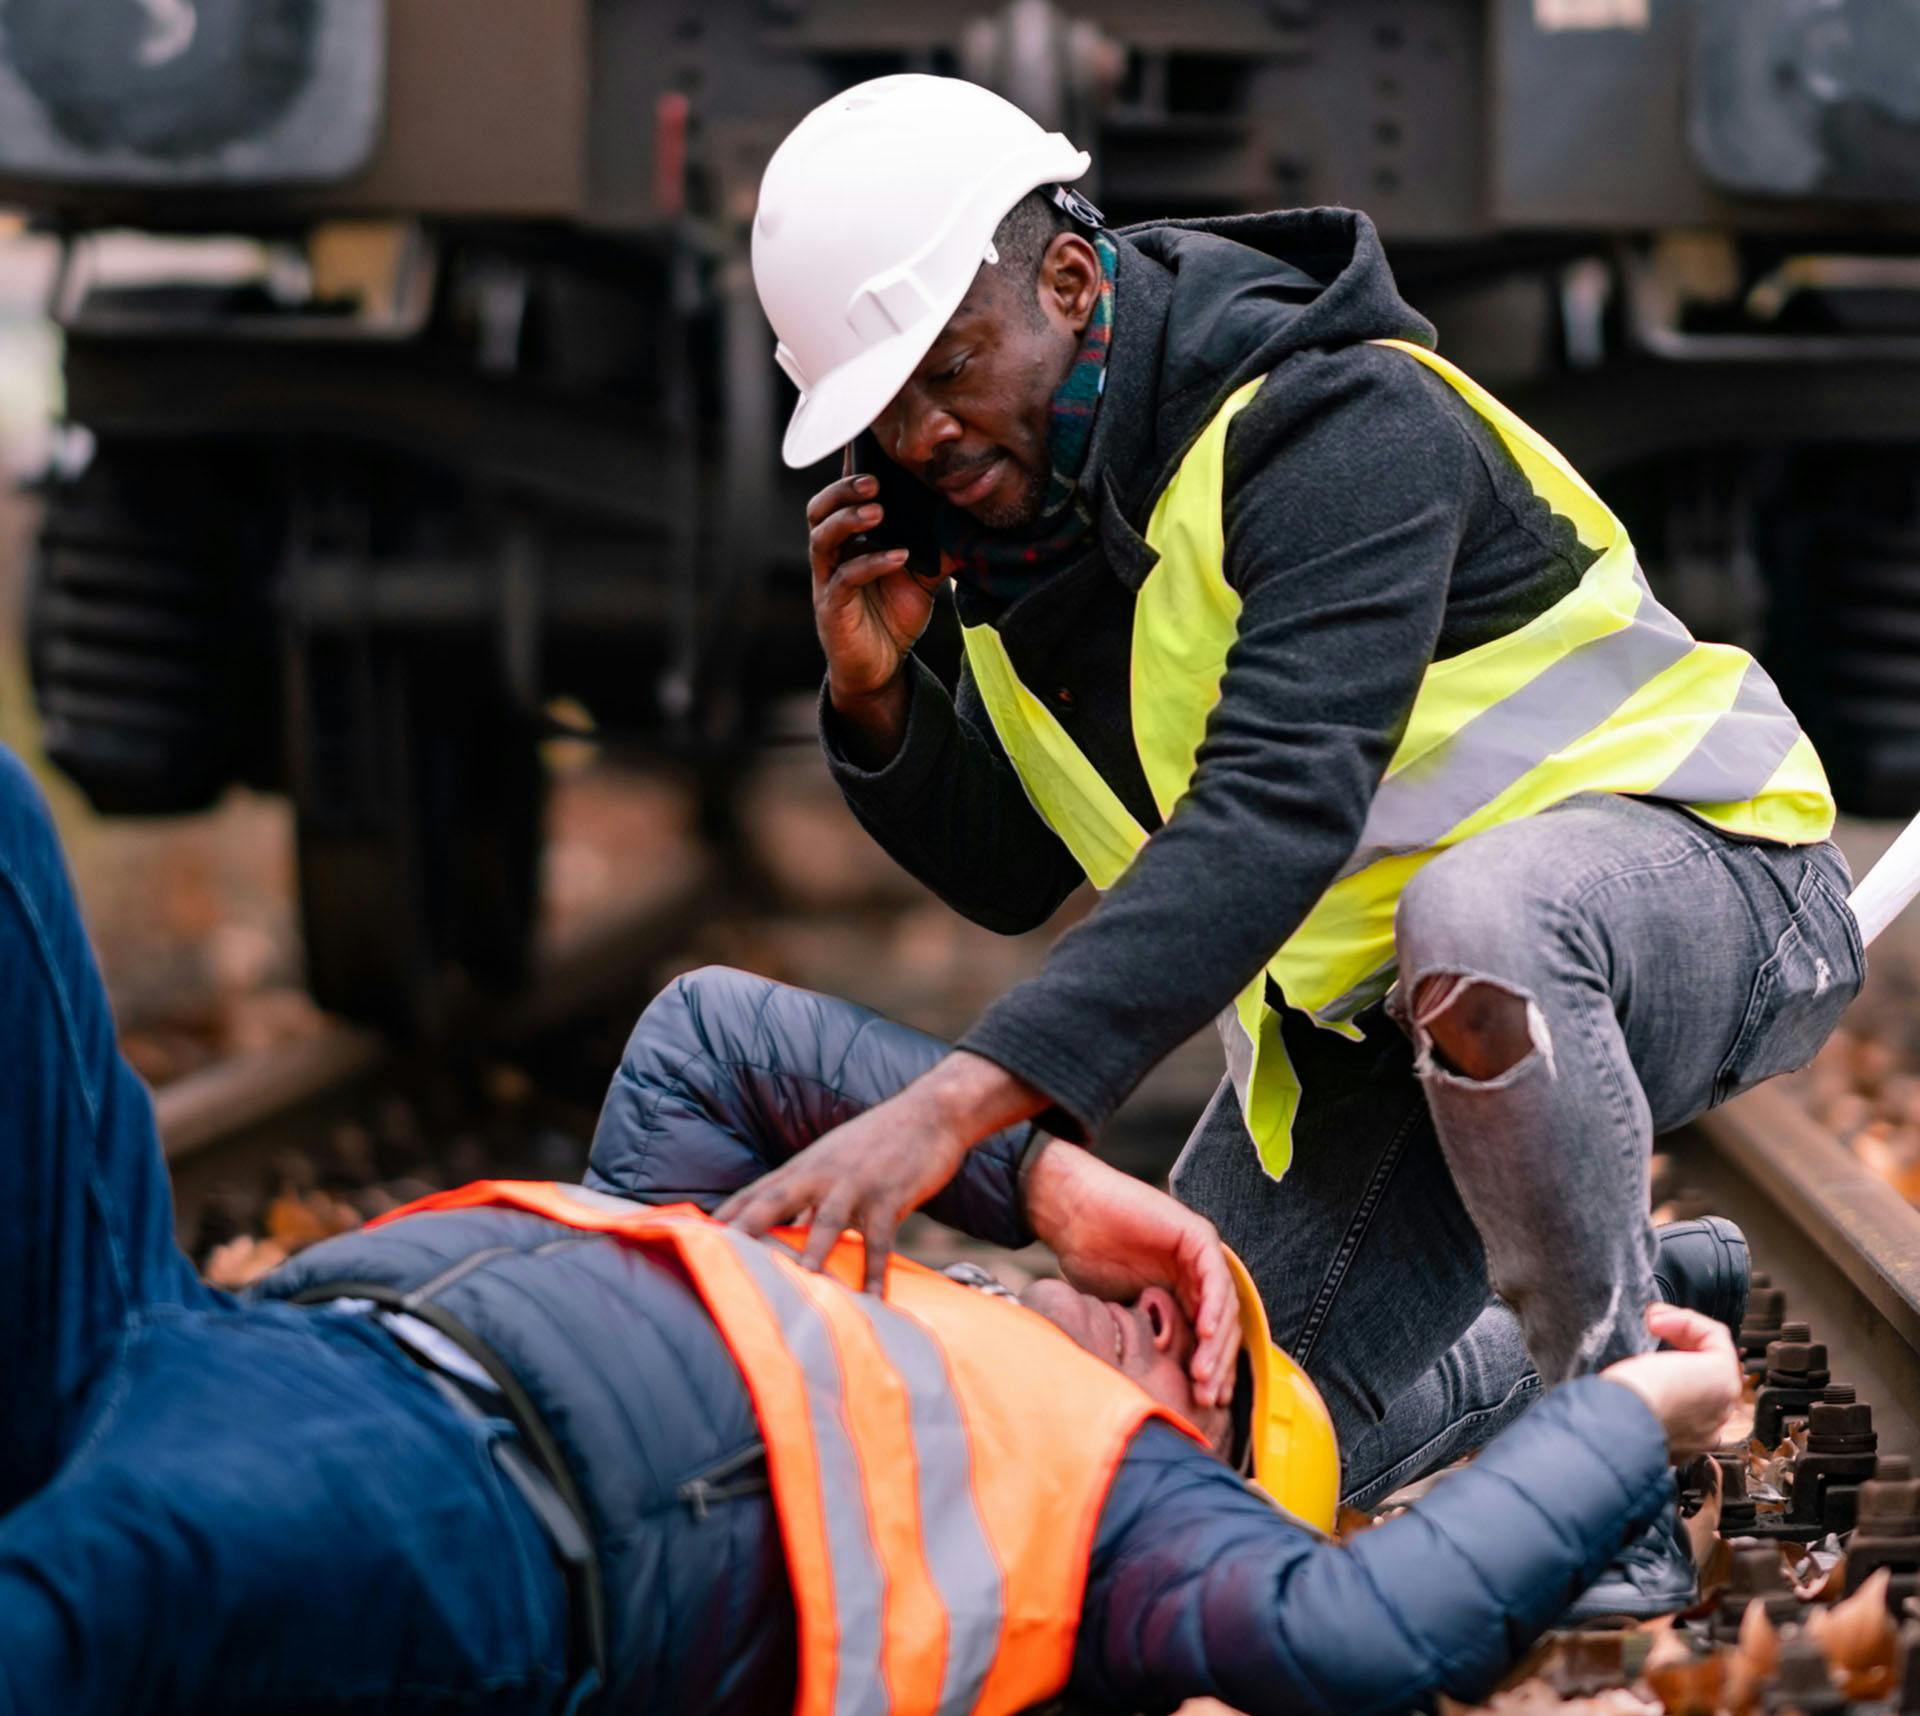 Injured railroad worker being helped by colleague